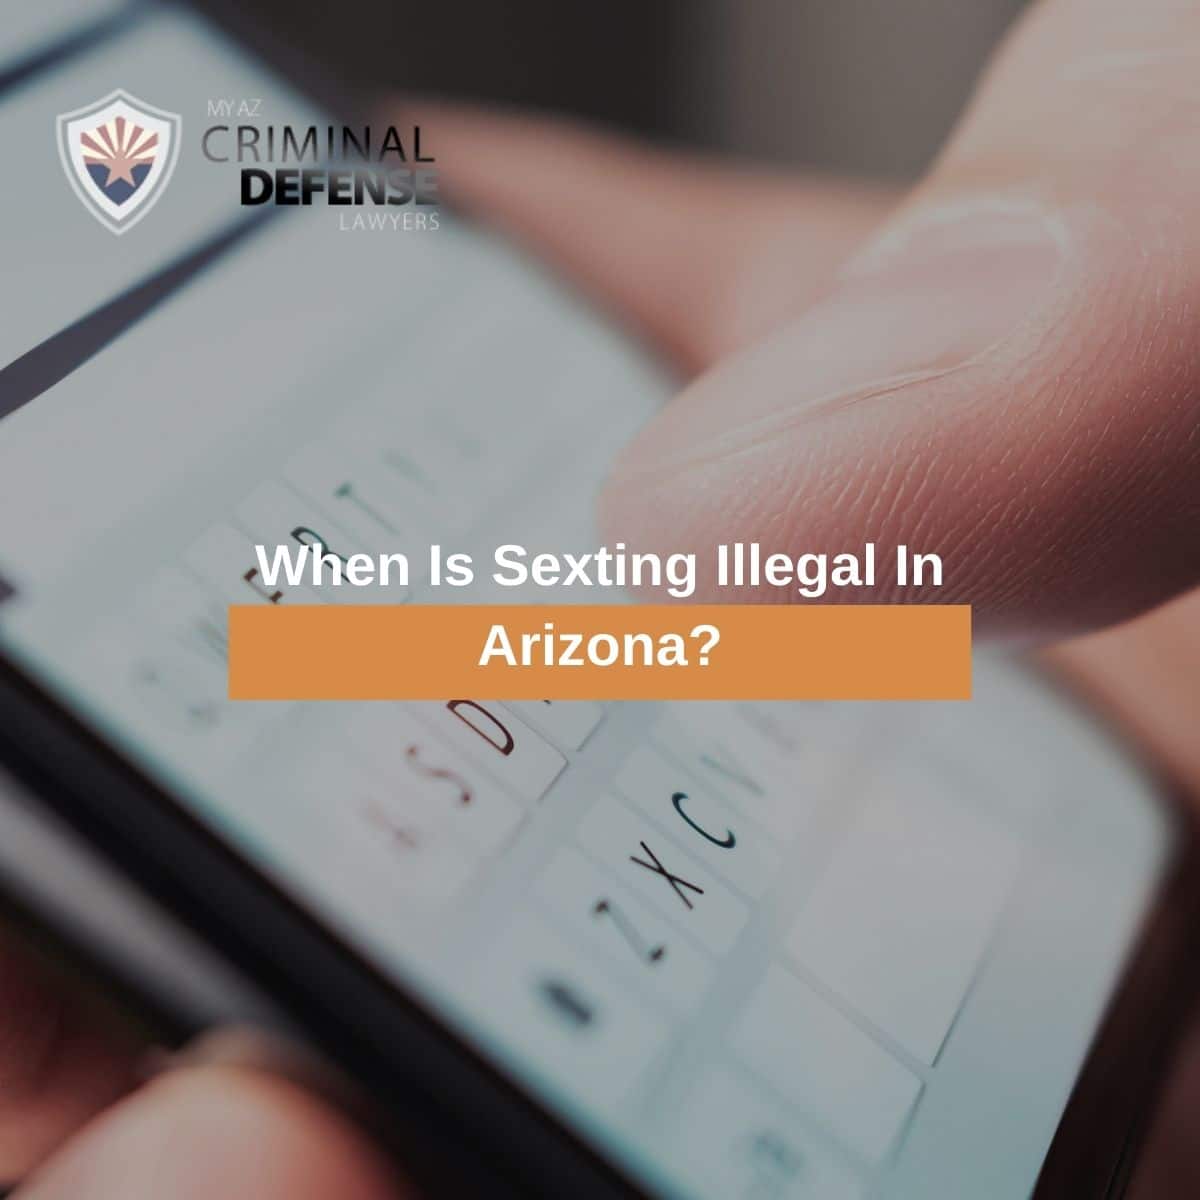 When Is Sexting Illegal In Arizona